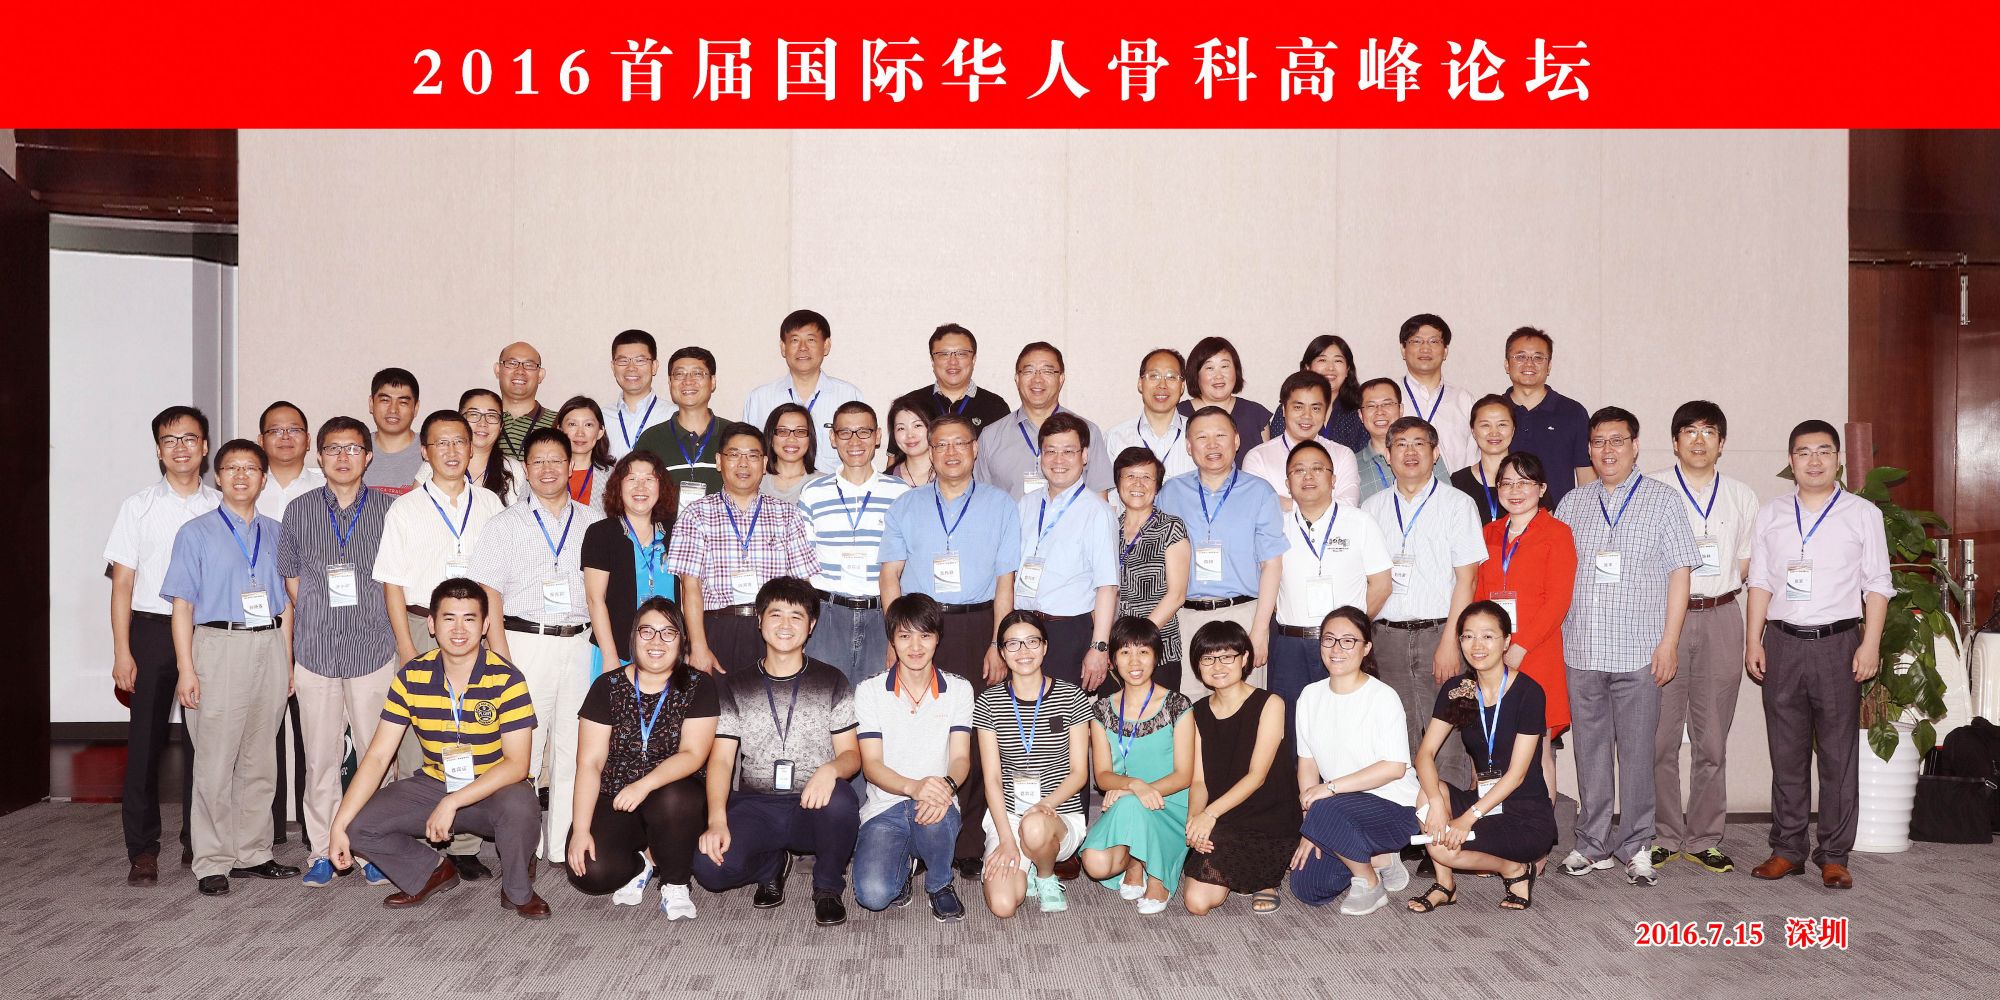 The First International Summit Forum for Chinese Orthopedics Held in SUSTech